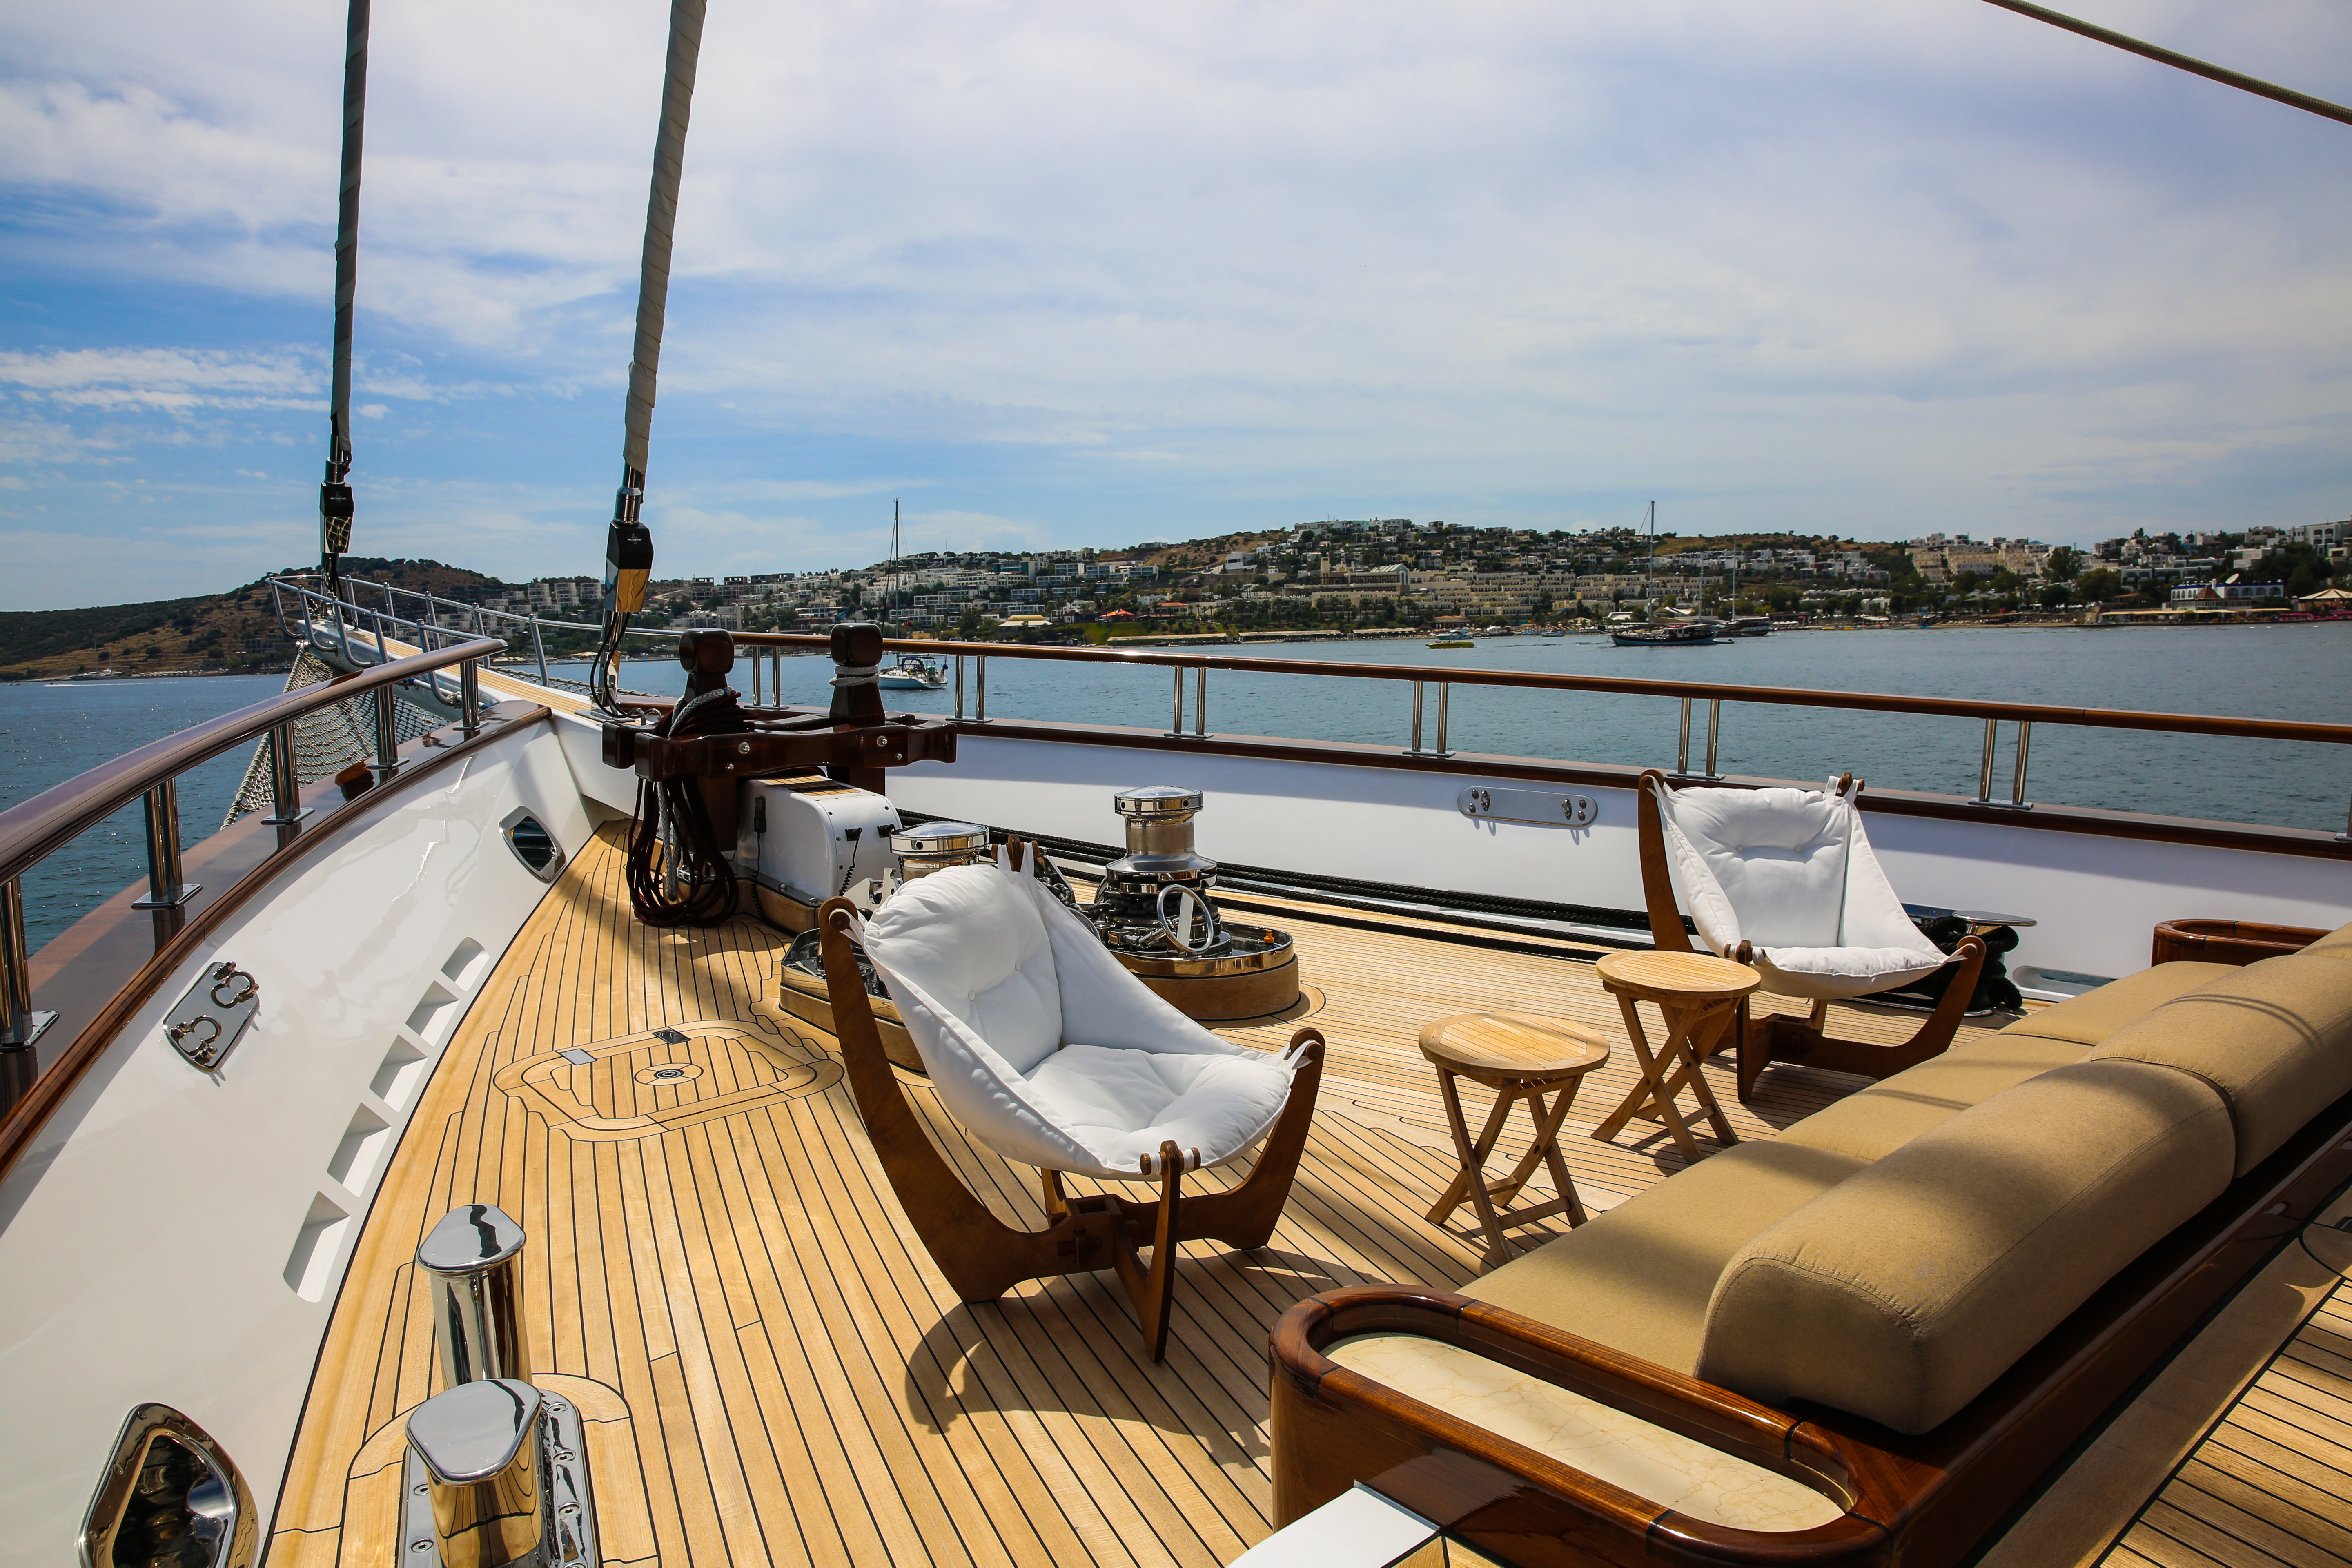 Foredeck Seating And Relaxation